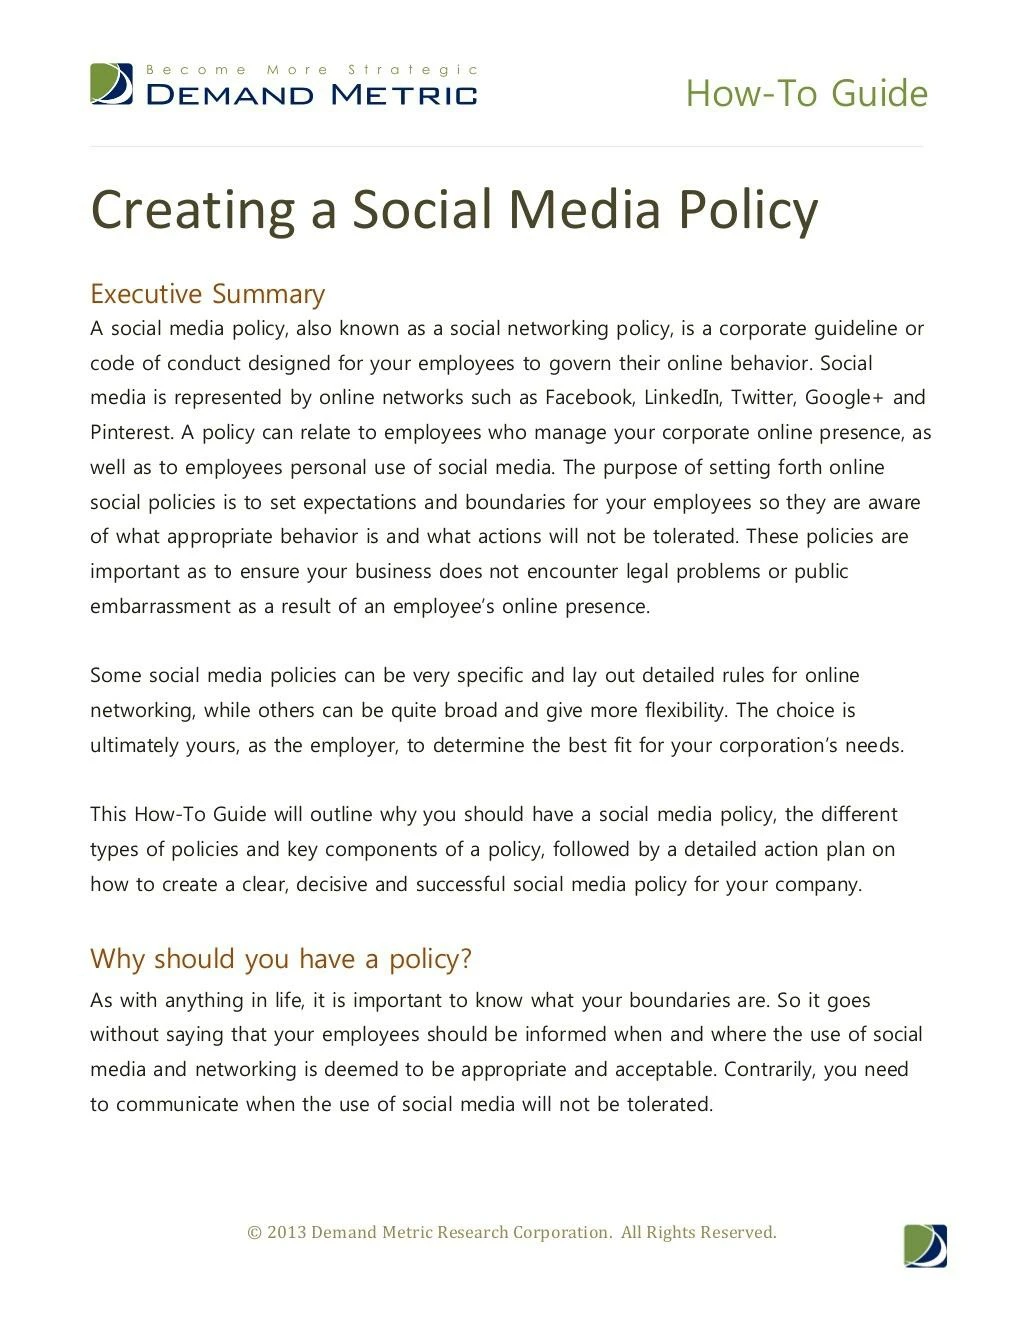 how to guide social media policy